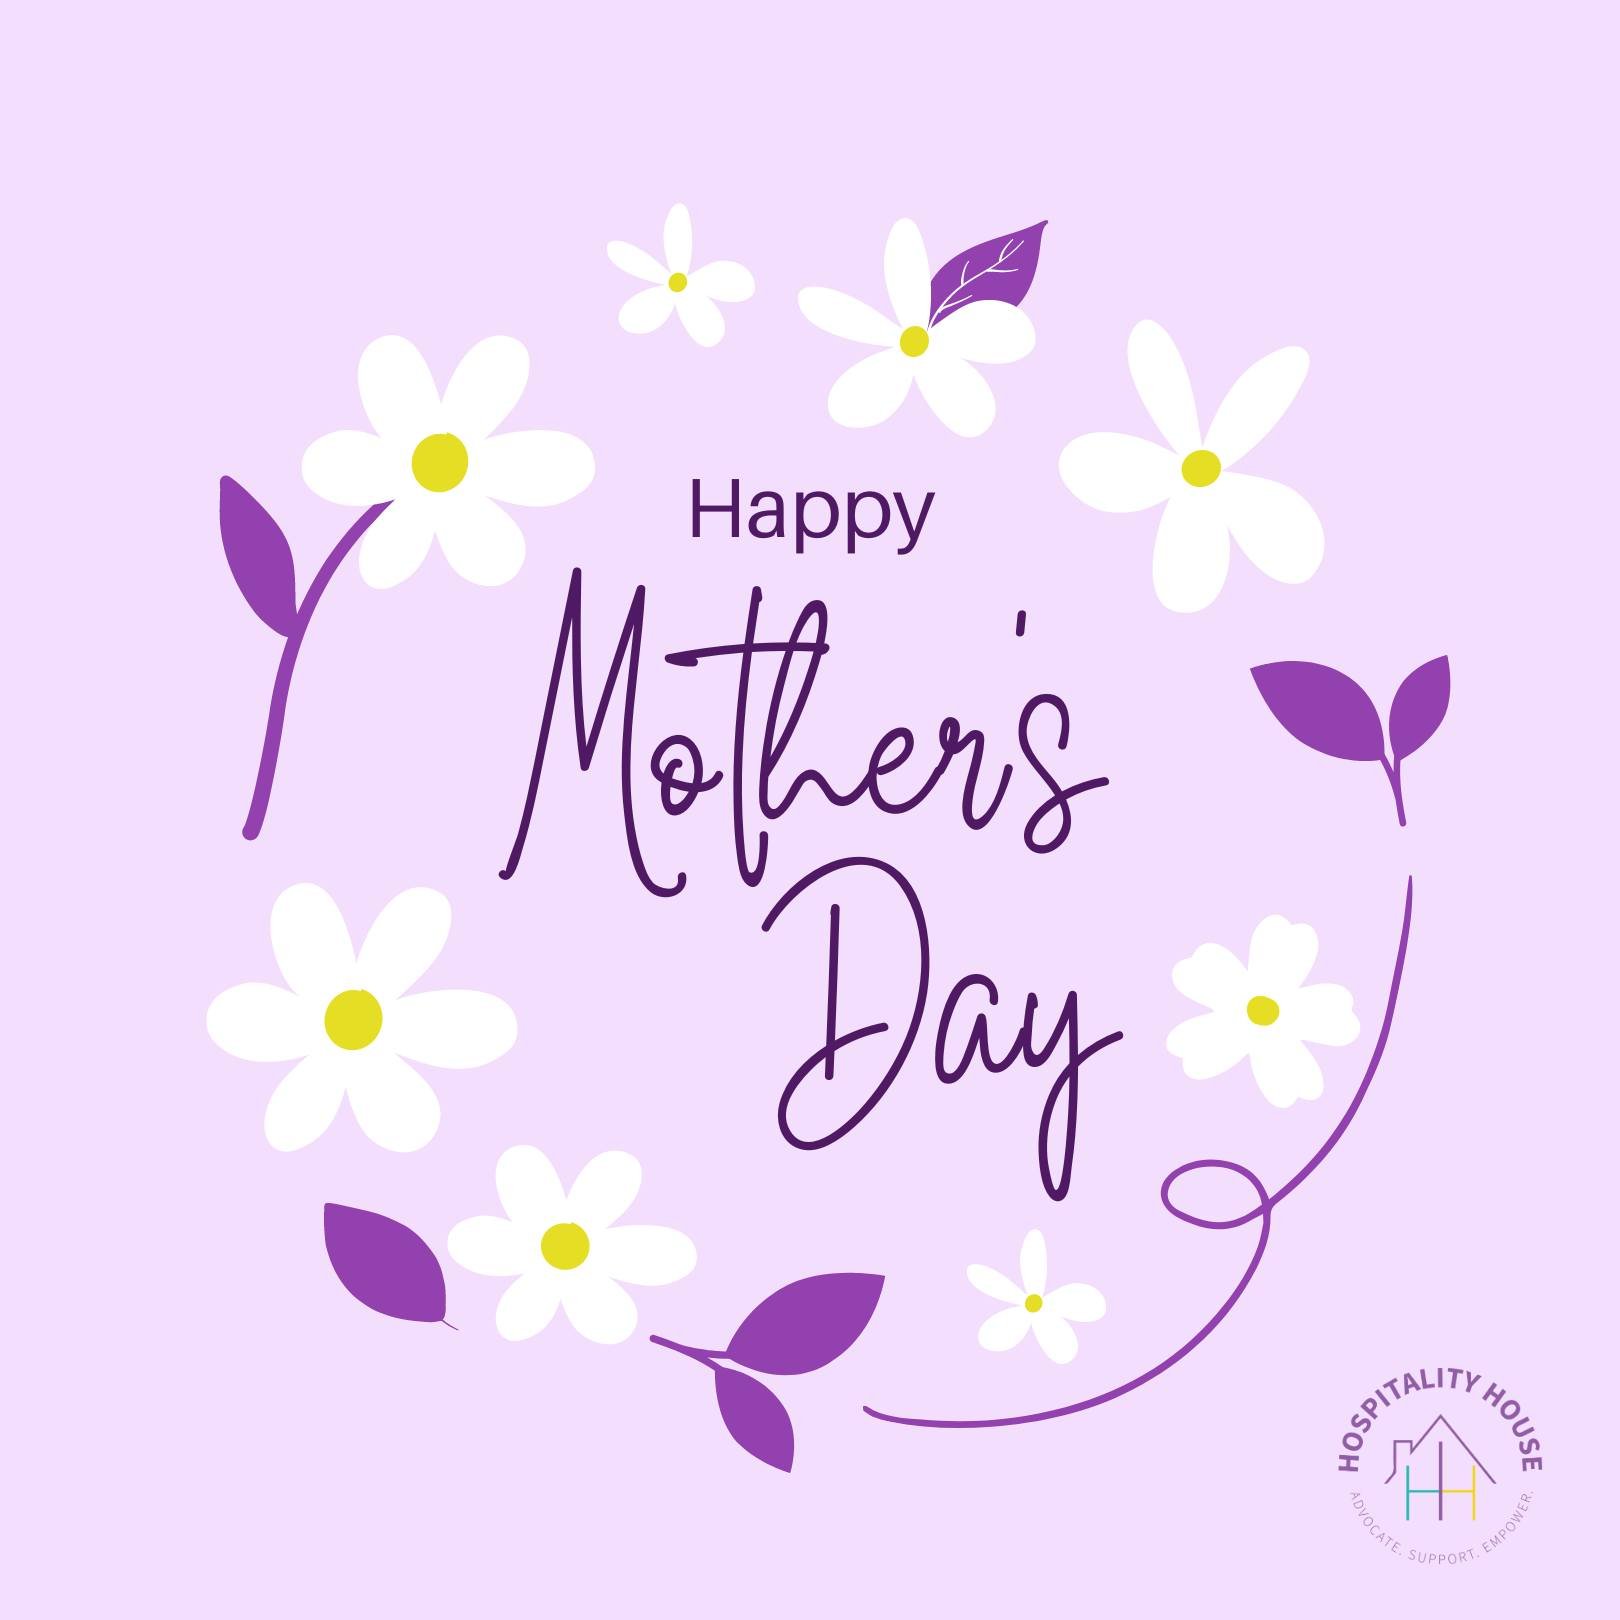 Happy Mother's Day from all of us at Hospitality House for Women! We are grateful to serve many mothers and families as they navigate fleeing intimate partner violence and beginning anew, one step at a time.

...

&iexcl;Feliz D&iacute;a de la Madre 